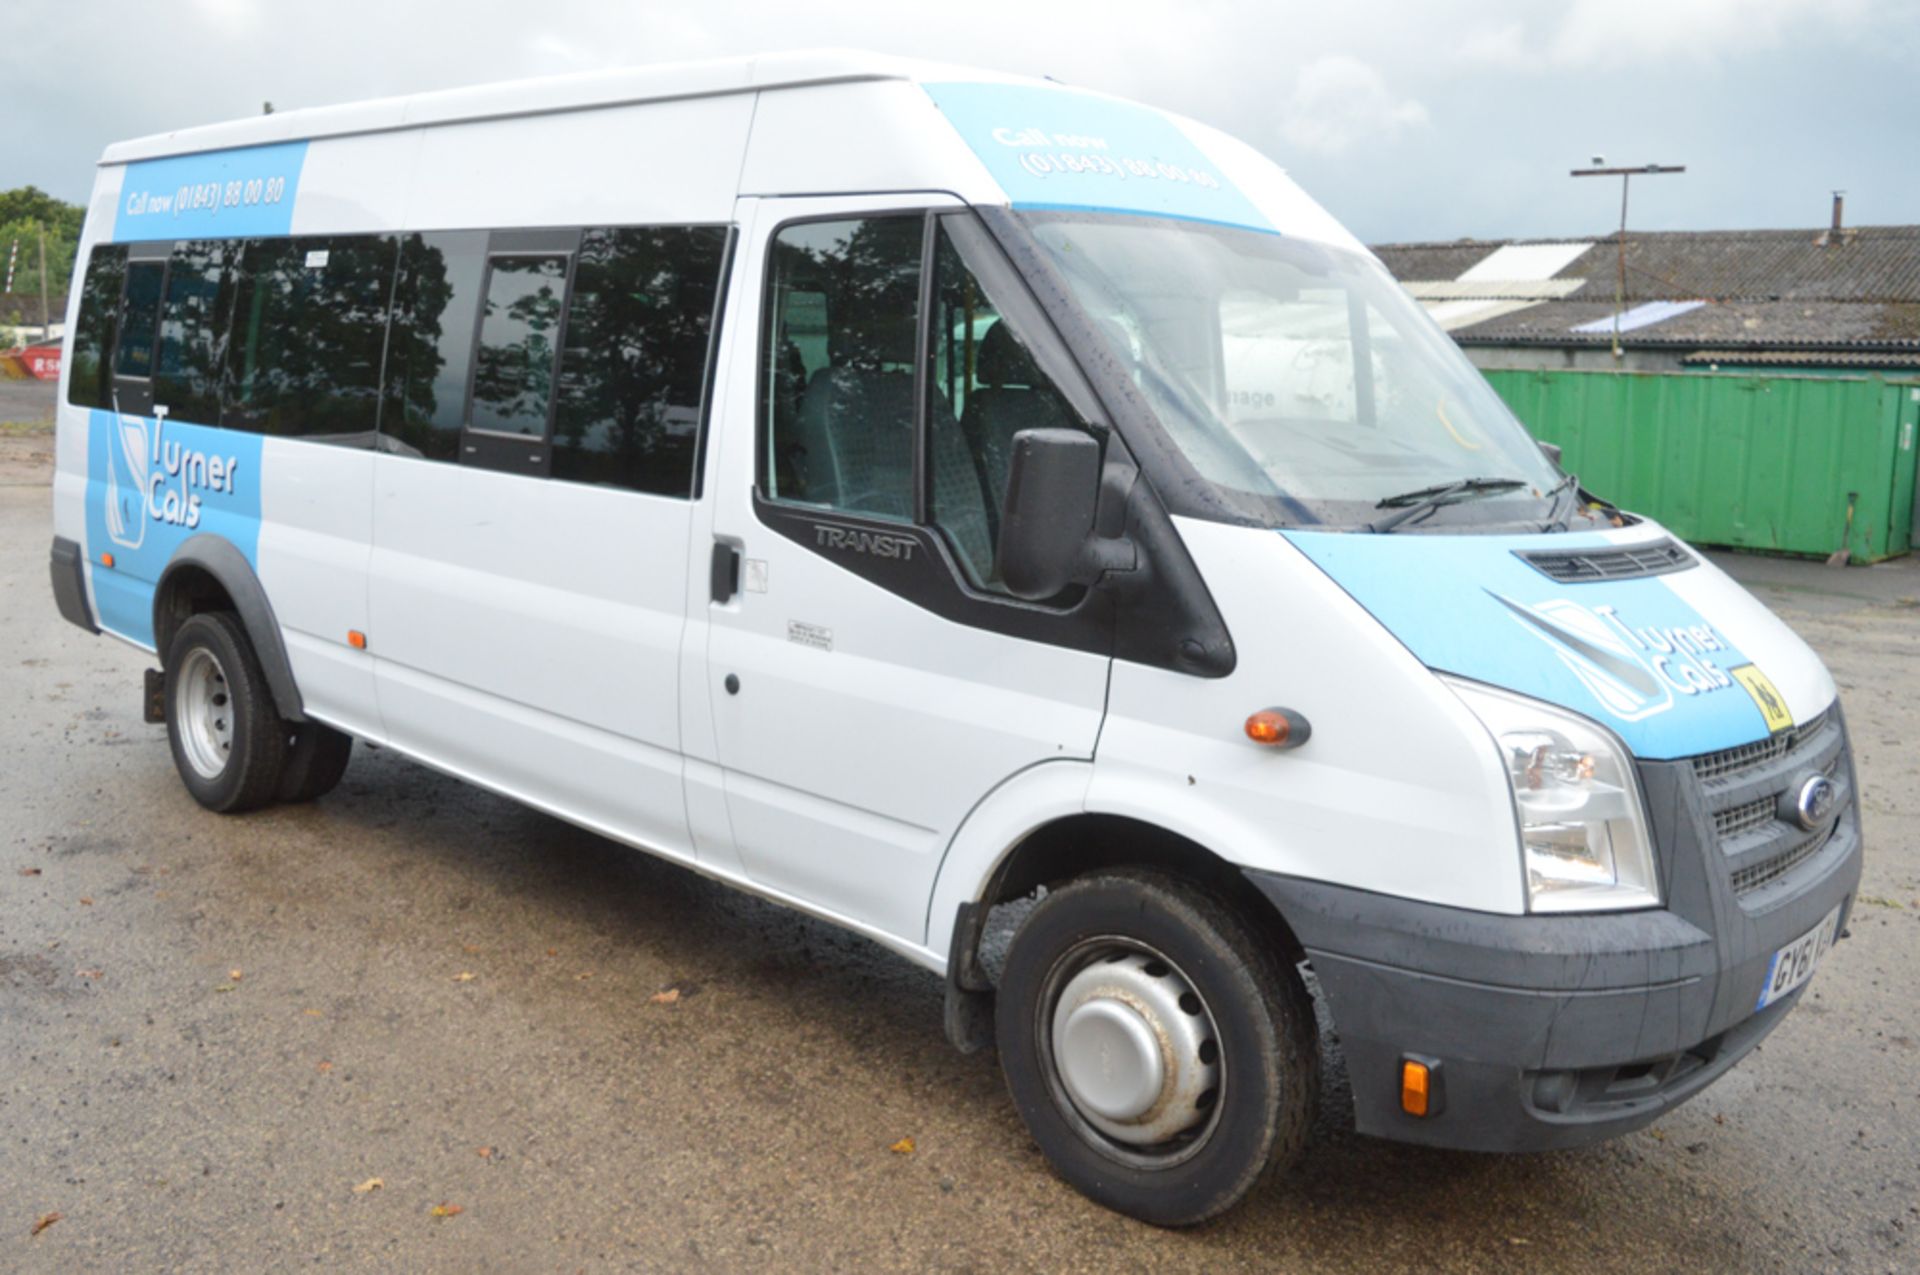 Ford Transit 135 T430 RWD 9 seat minibus Registration Number: GY61 VZA Date of Registration: 30/